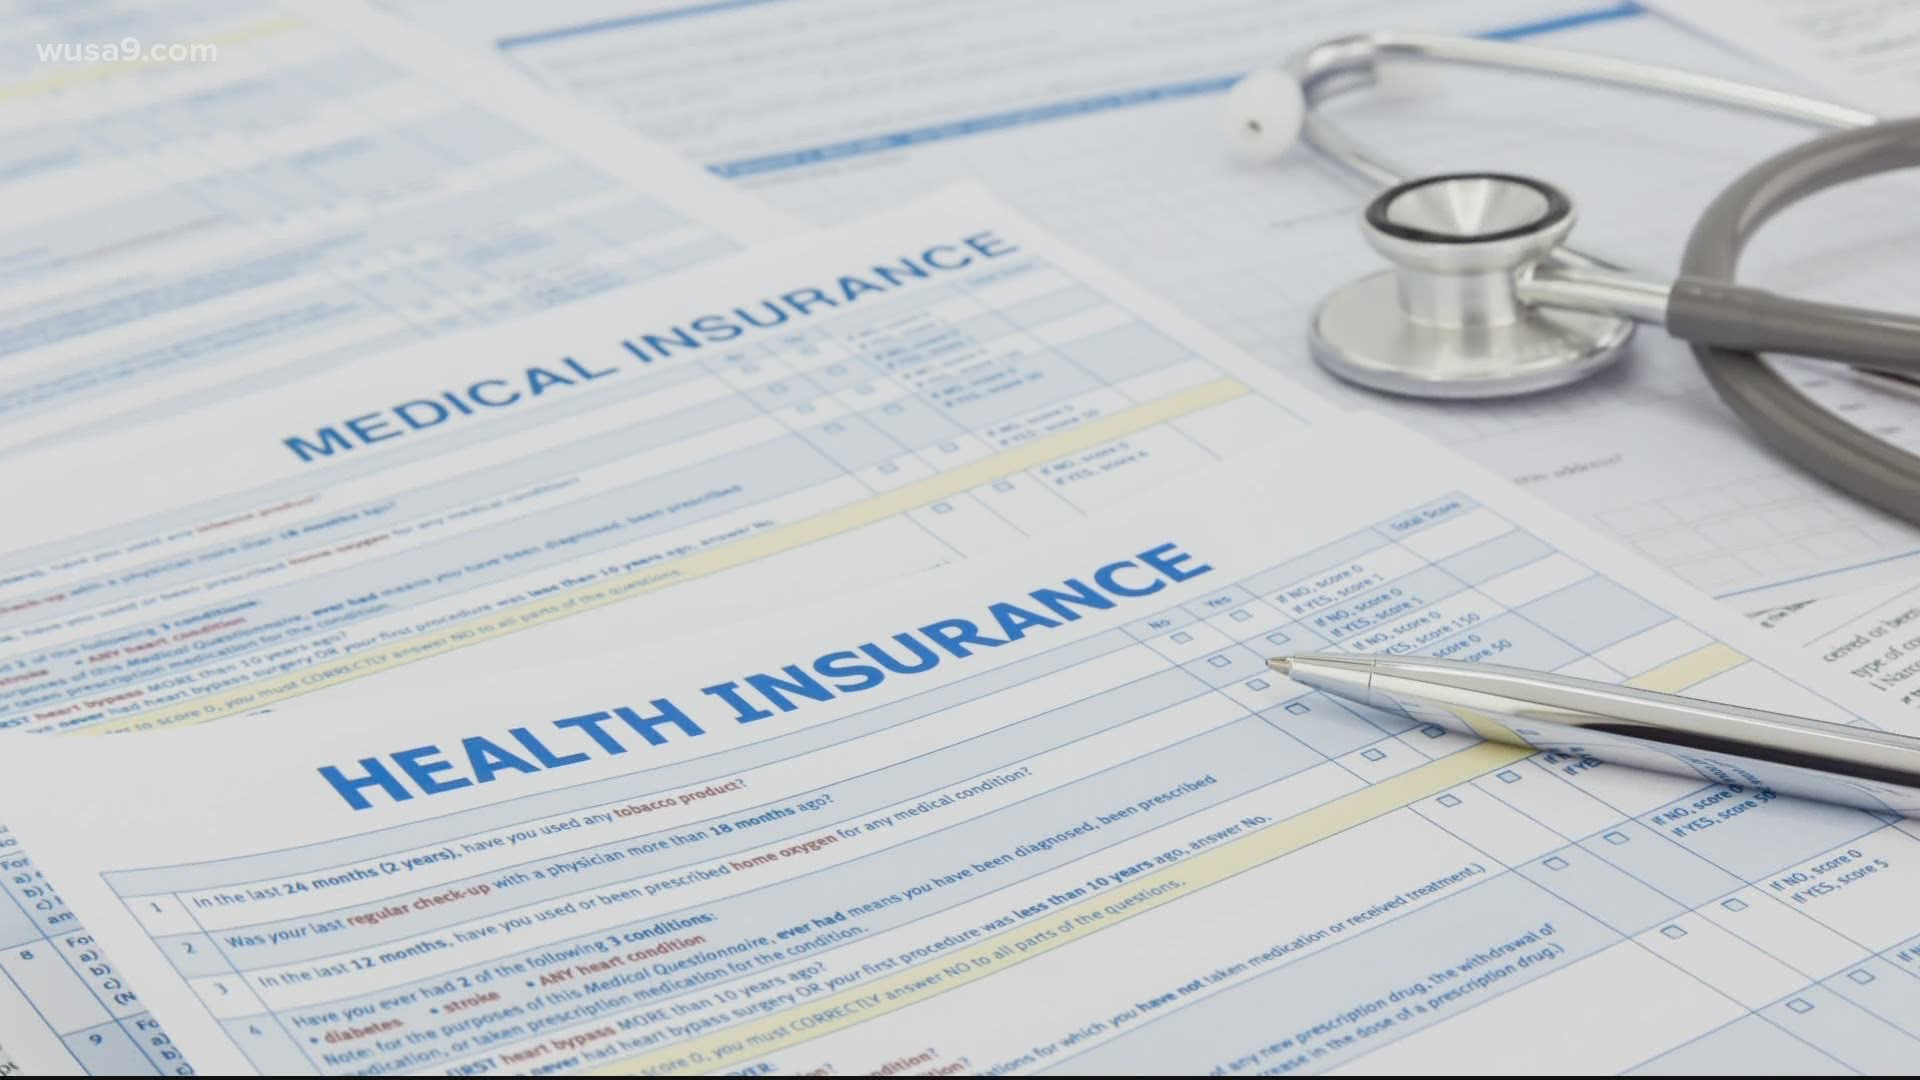 Four insurance providers told the Verify team that neither a test nor a diagnosis of COVID-19 would impact health care premiums in 2021.